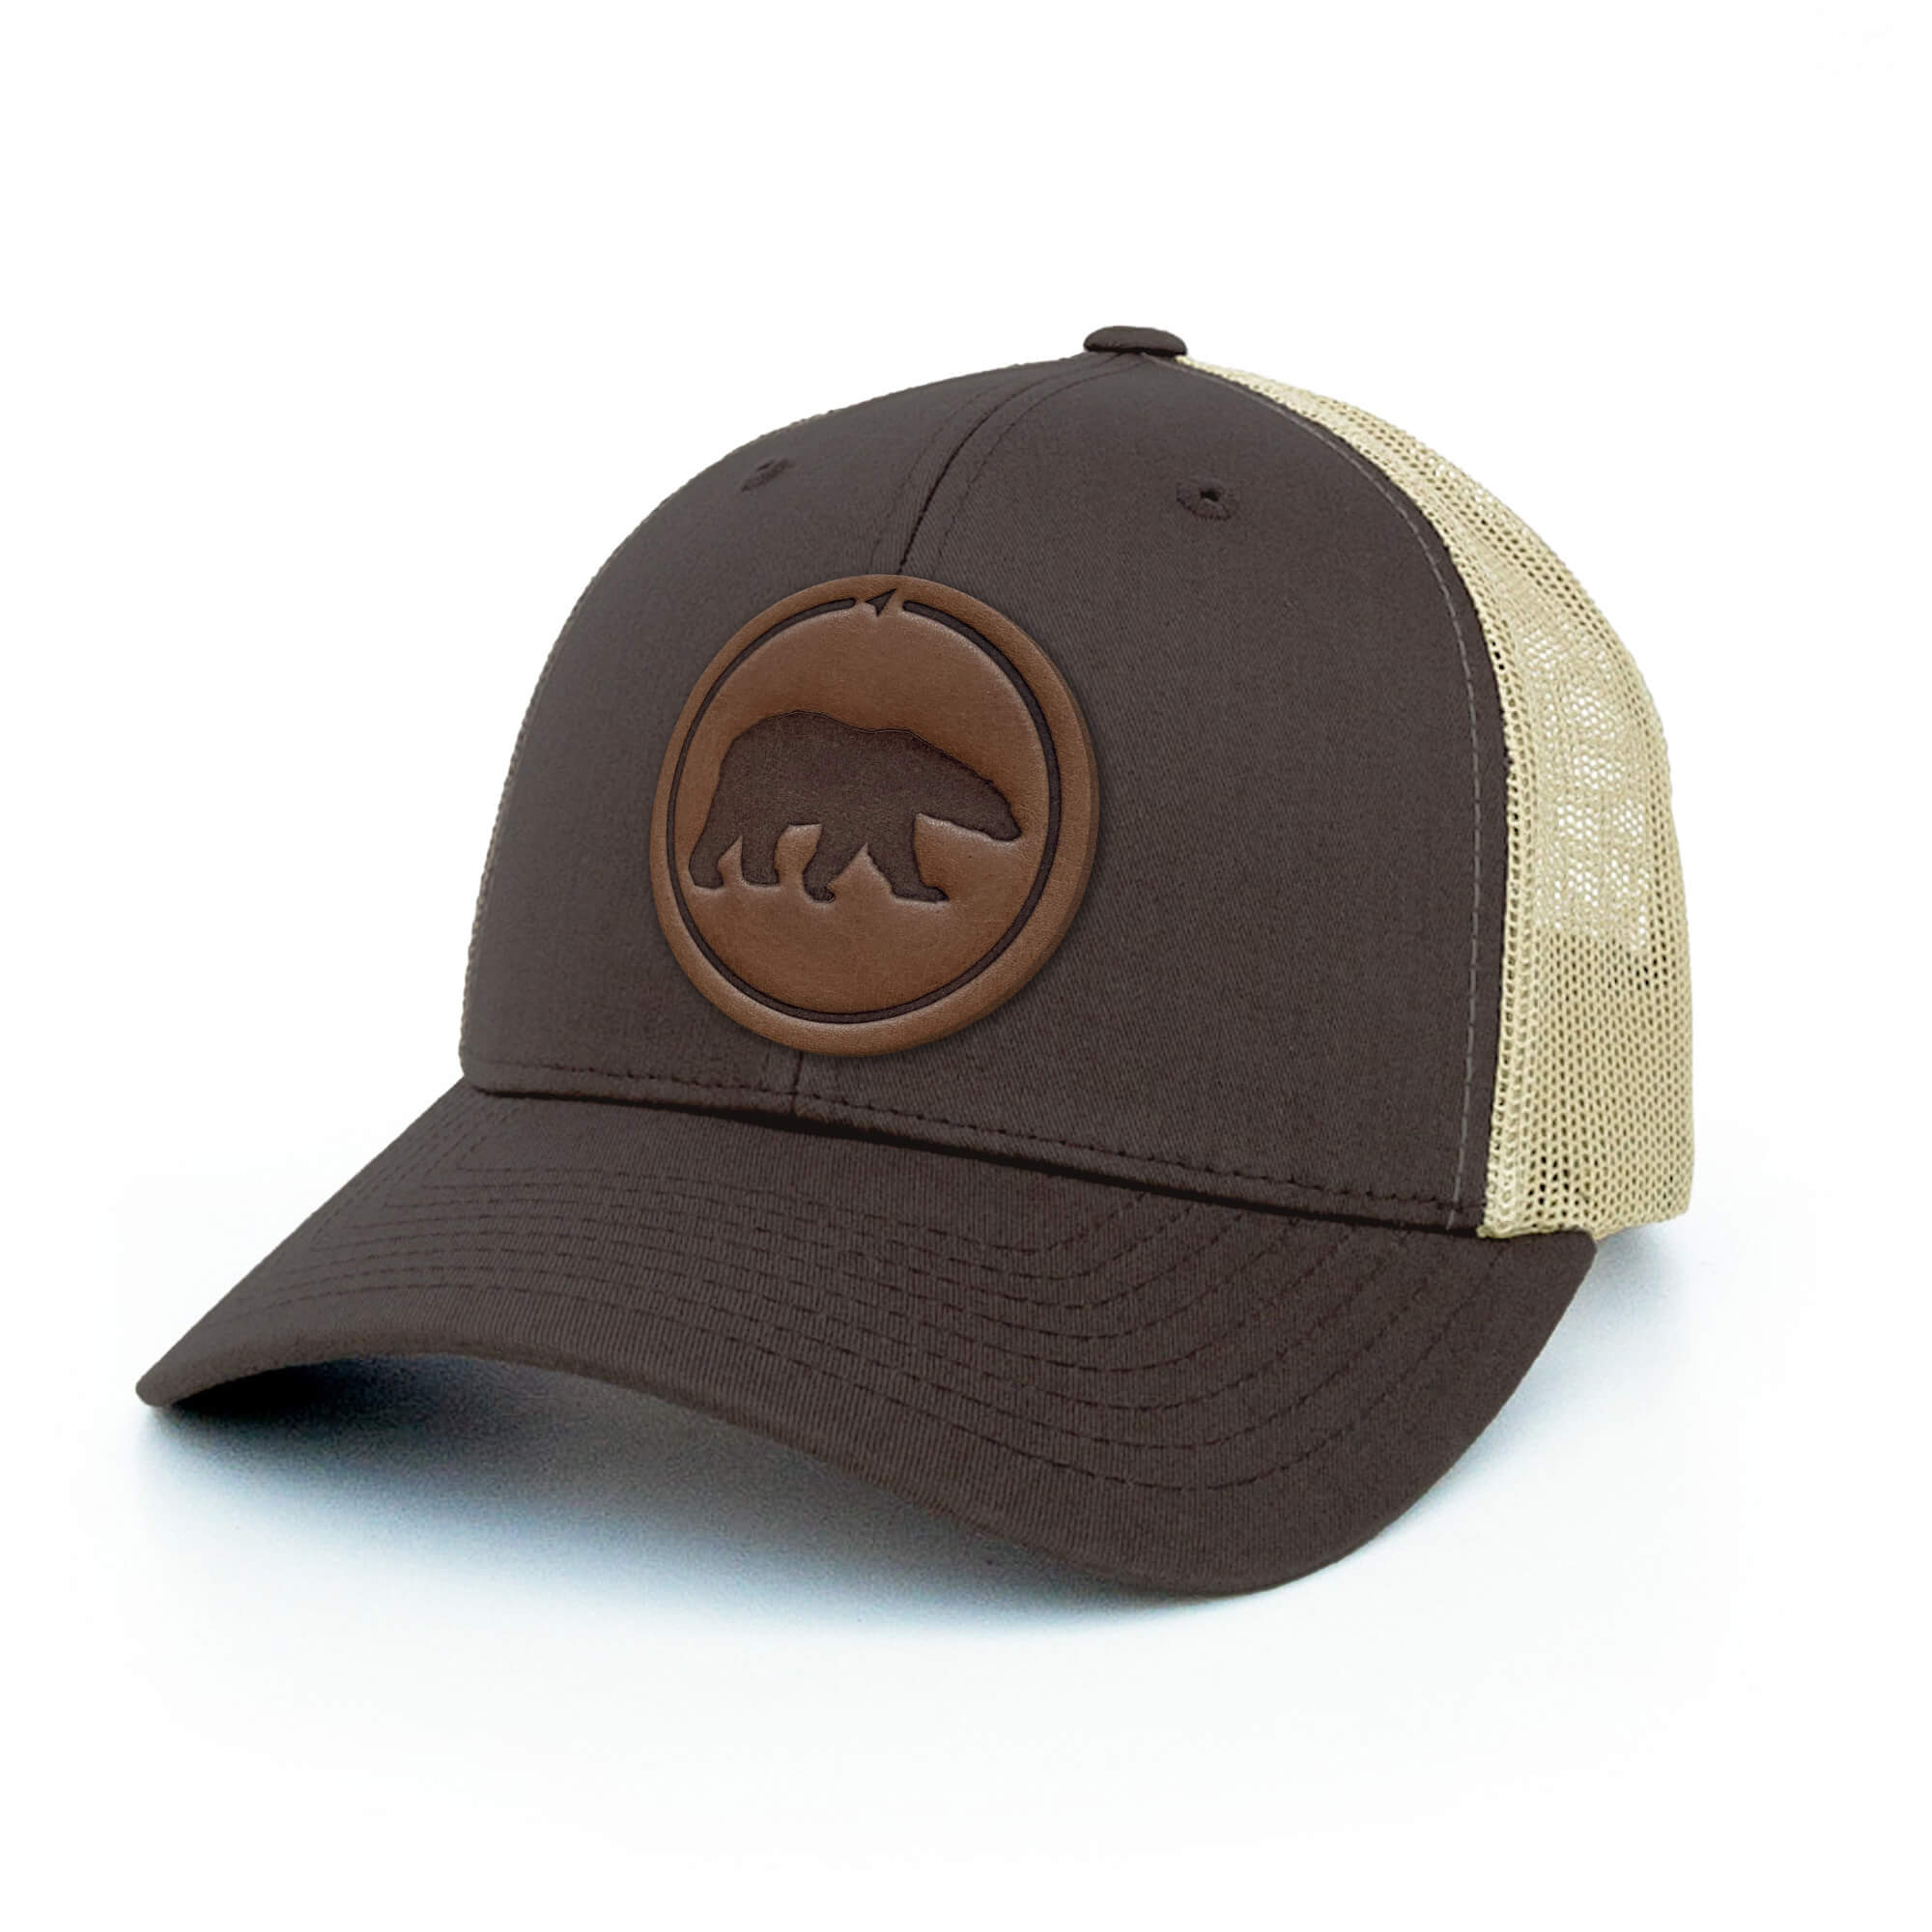 Brown and Khaki trucker hat with full-grain leather patch of a Polar Bear | BLACK-004-003, CHARC-004-003, NAVY-004-003, HGREY-004-003, MOSS-004-003, BROWN-004-003